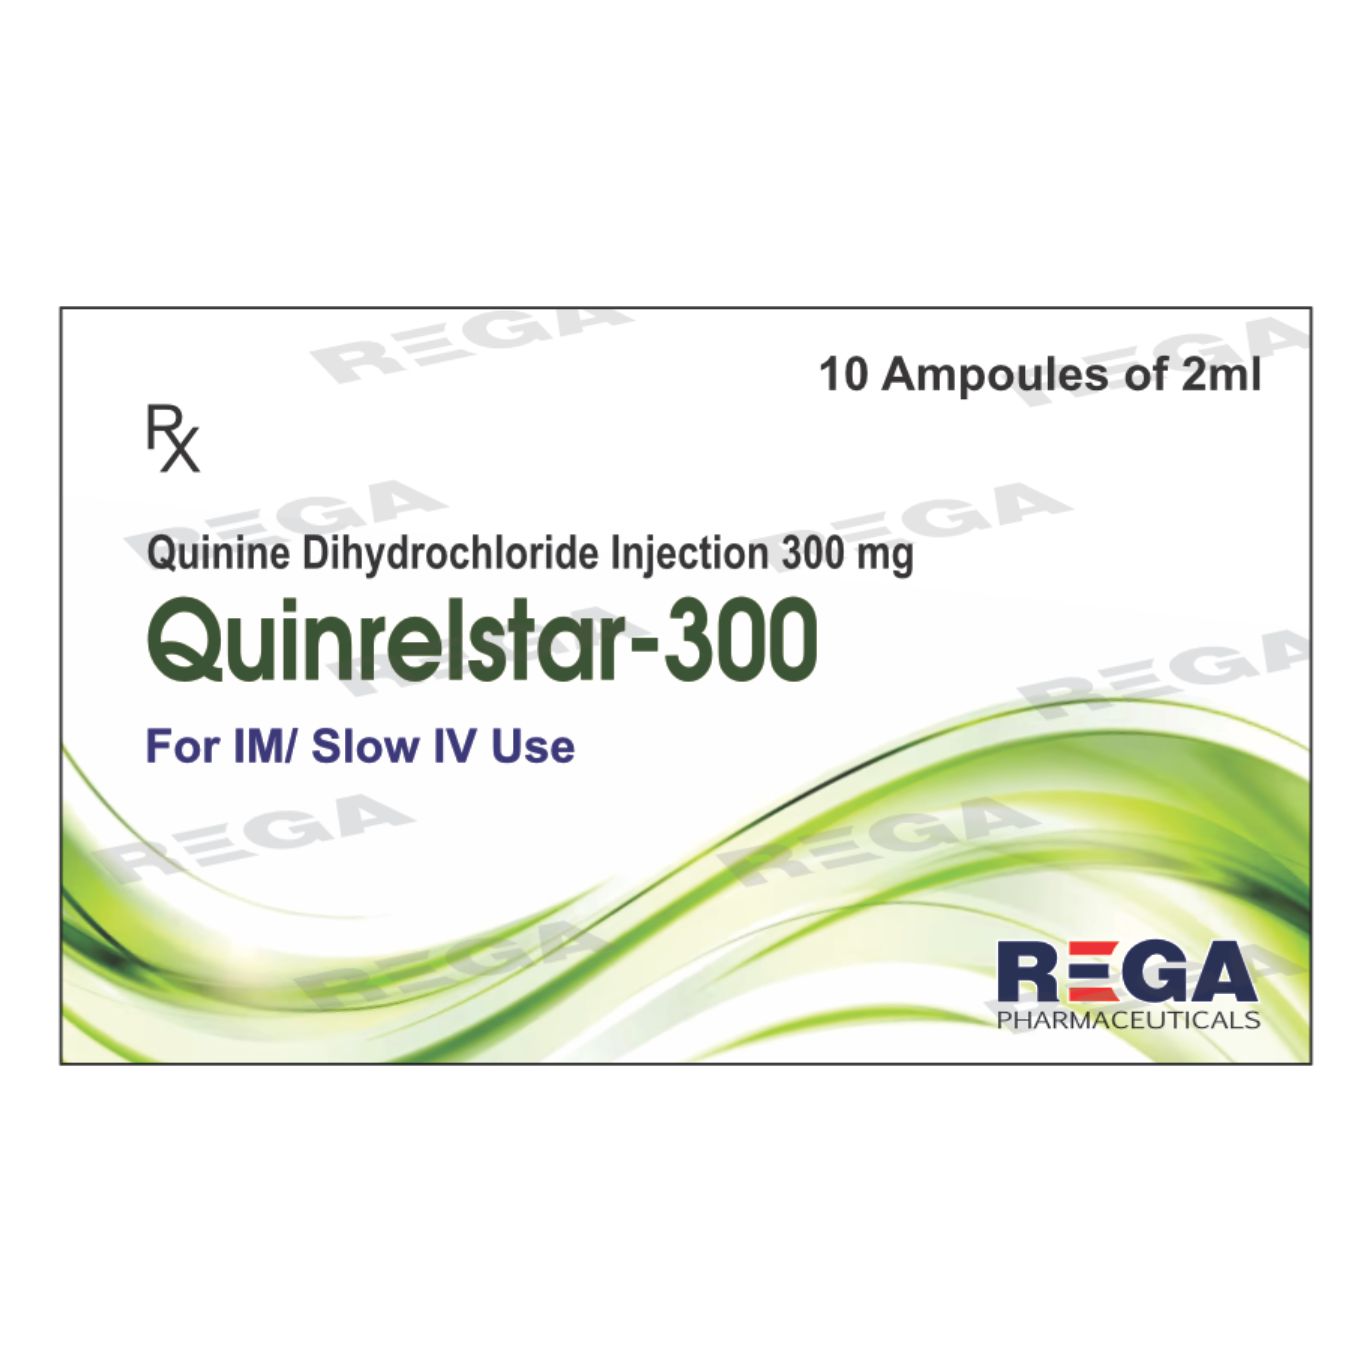 Quinine Dihydrochloride Injection 300 mg